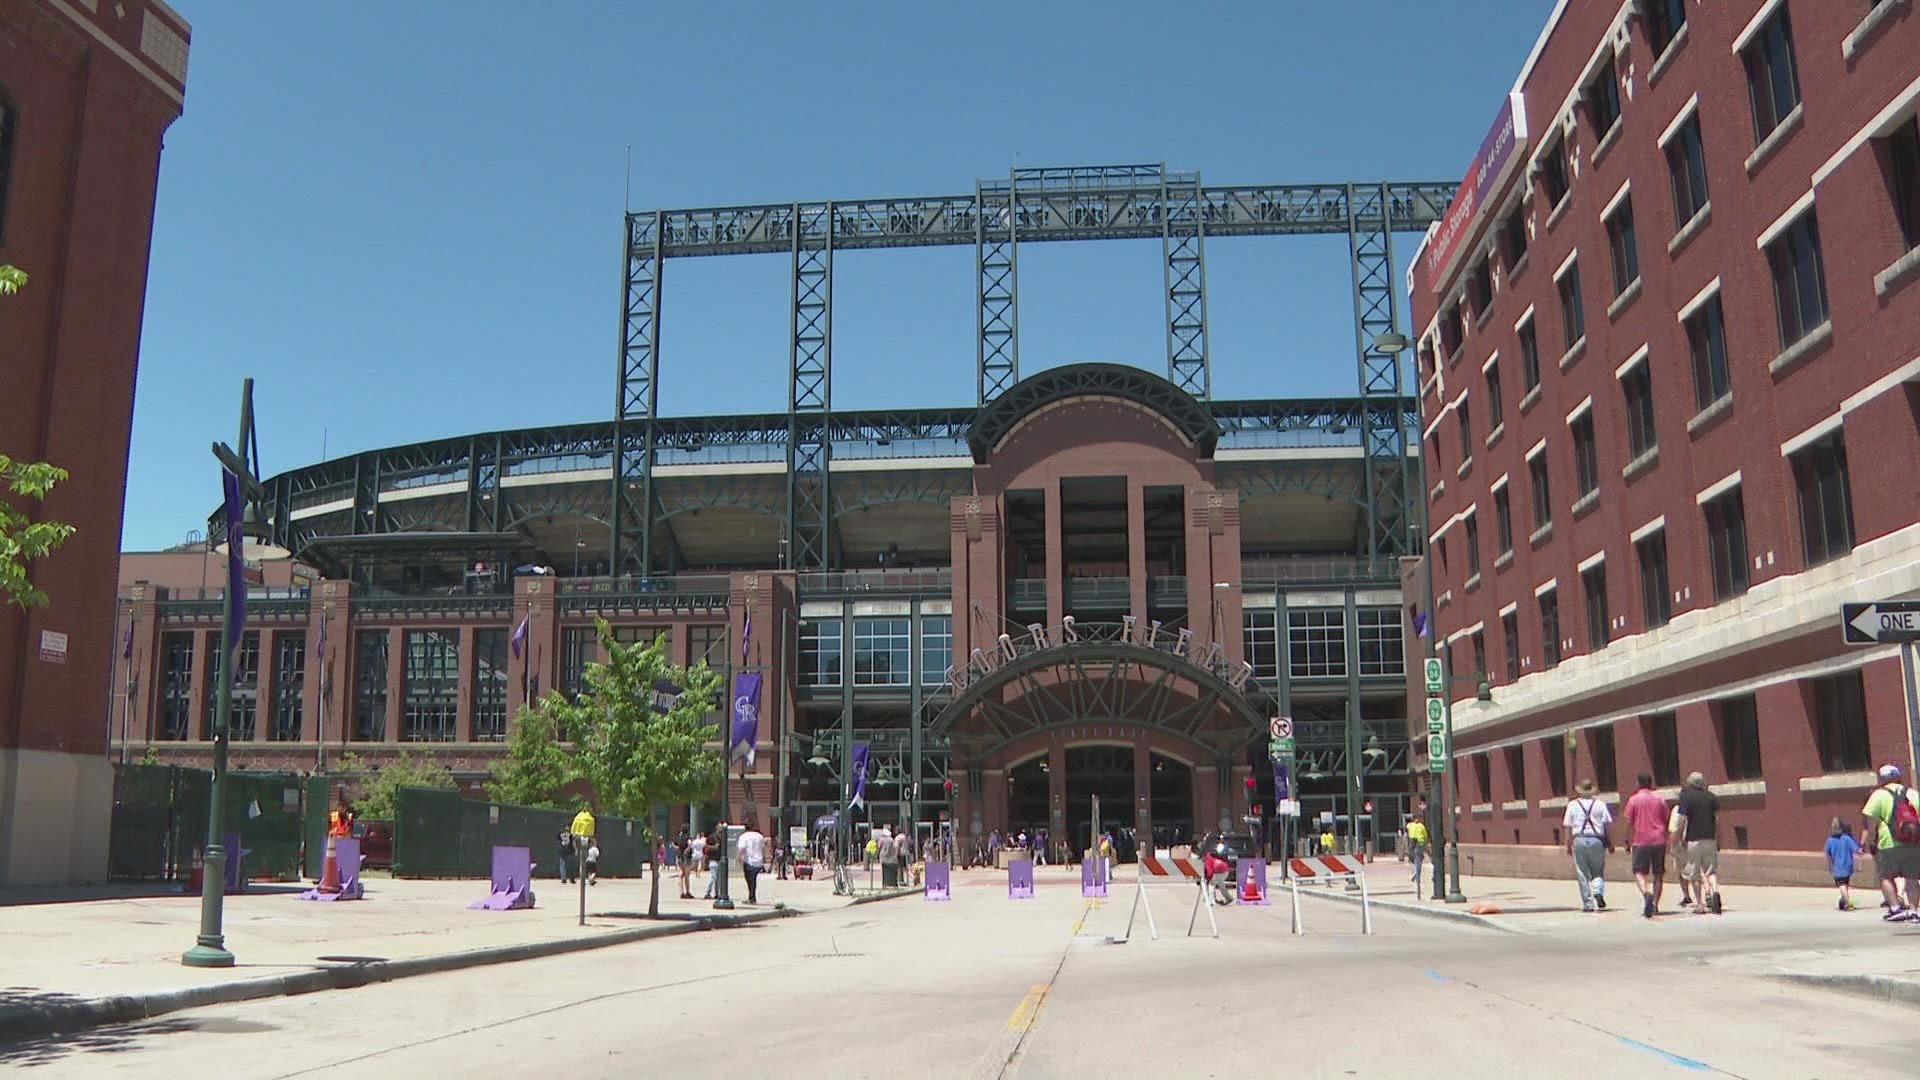 Baseball is back in downtown Denver after the 2020 season started months late and 2021 brought a lot of restrictions and capacity limits.